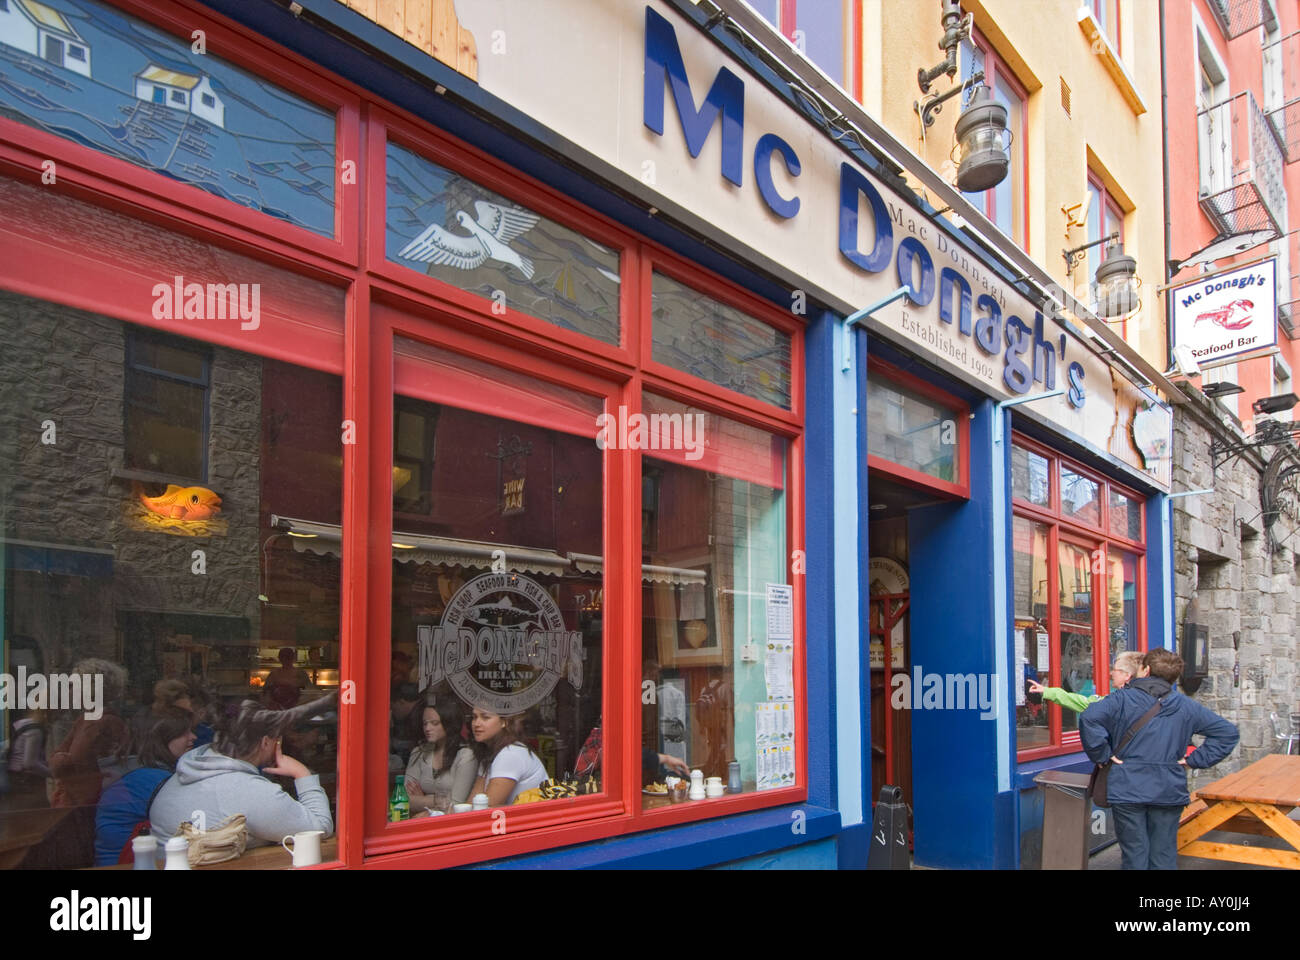 Ireland County Galway Galway City McDonagh's Seafood Restaurant Stock Photo